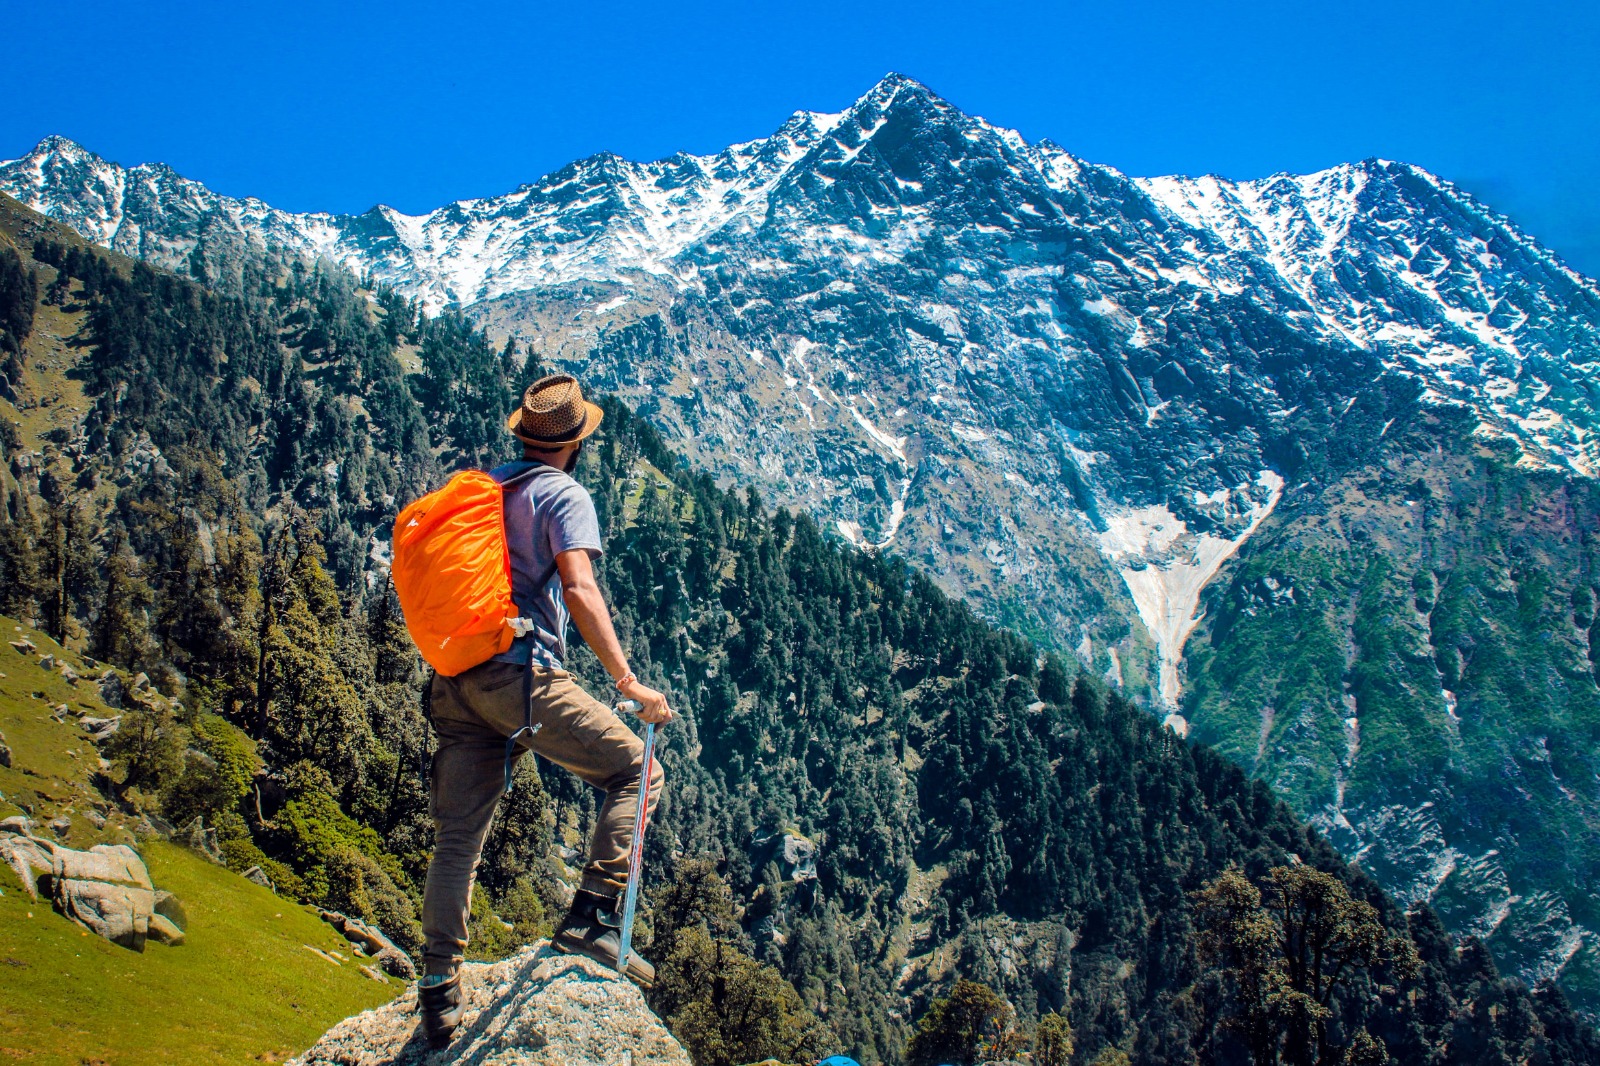 Man hiking in the wilderness with a backpack looking at the mountains